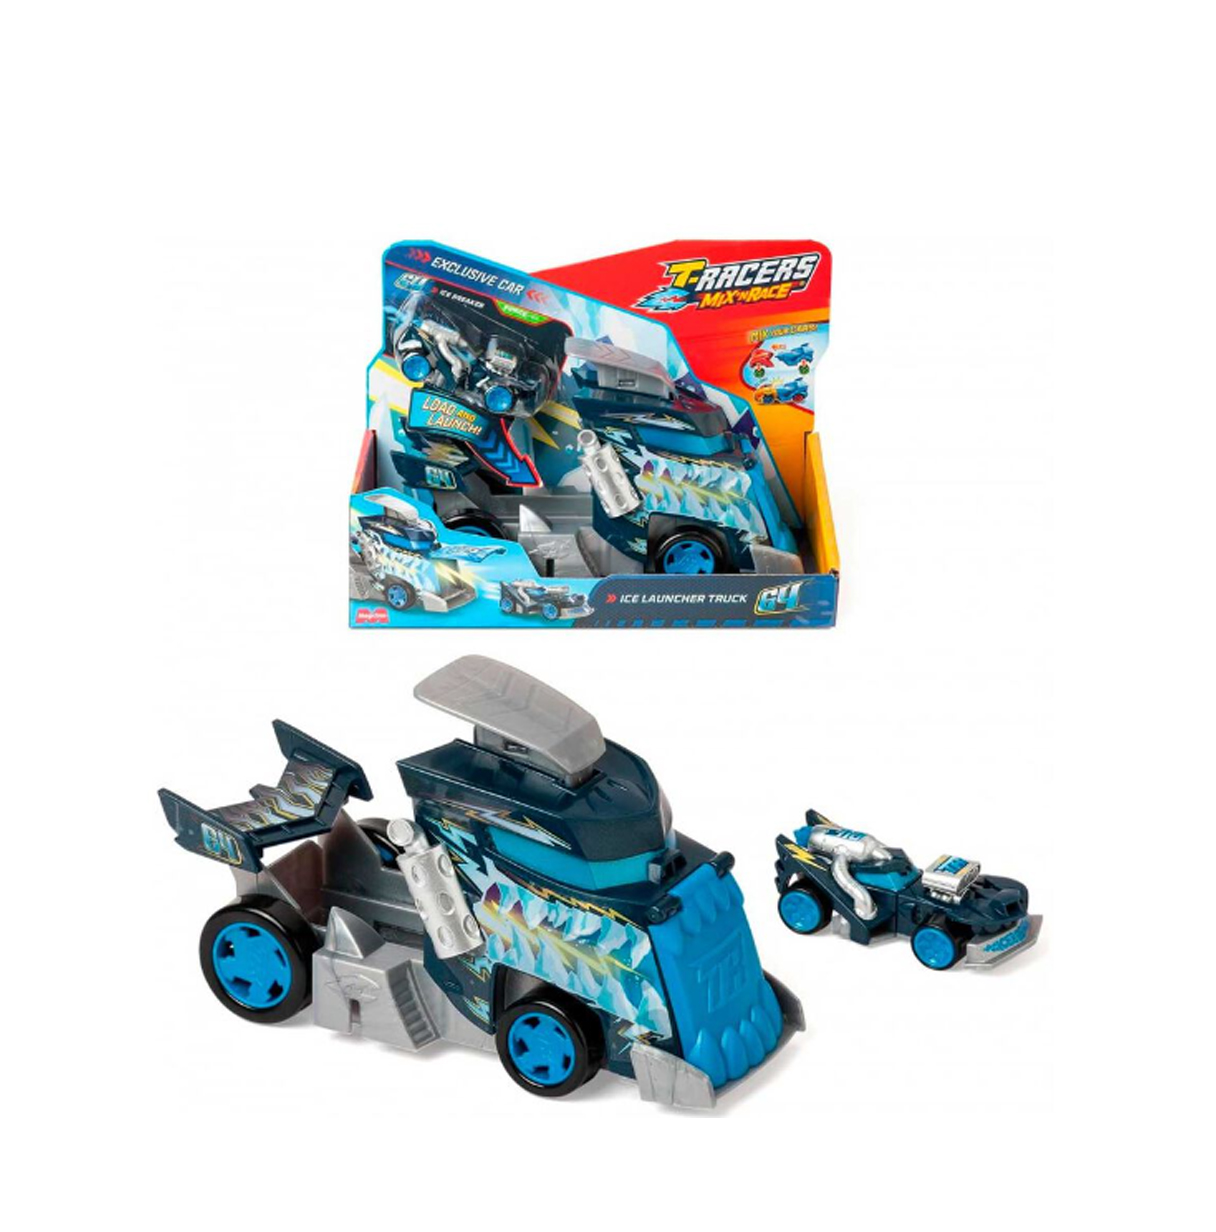 t-racers mix´n race ice launcher truck (magicbox - ptrsp116in30 )